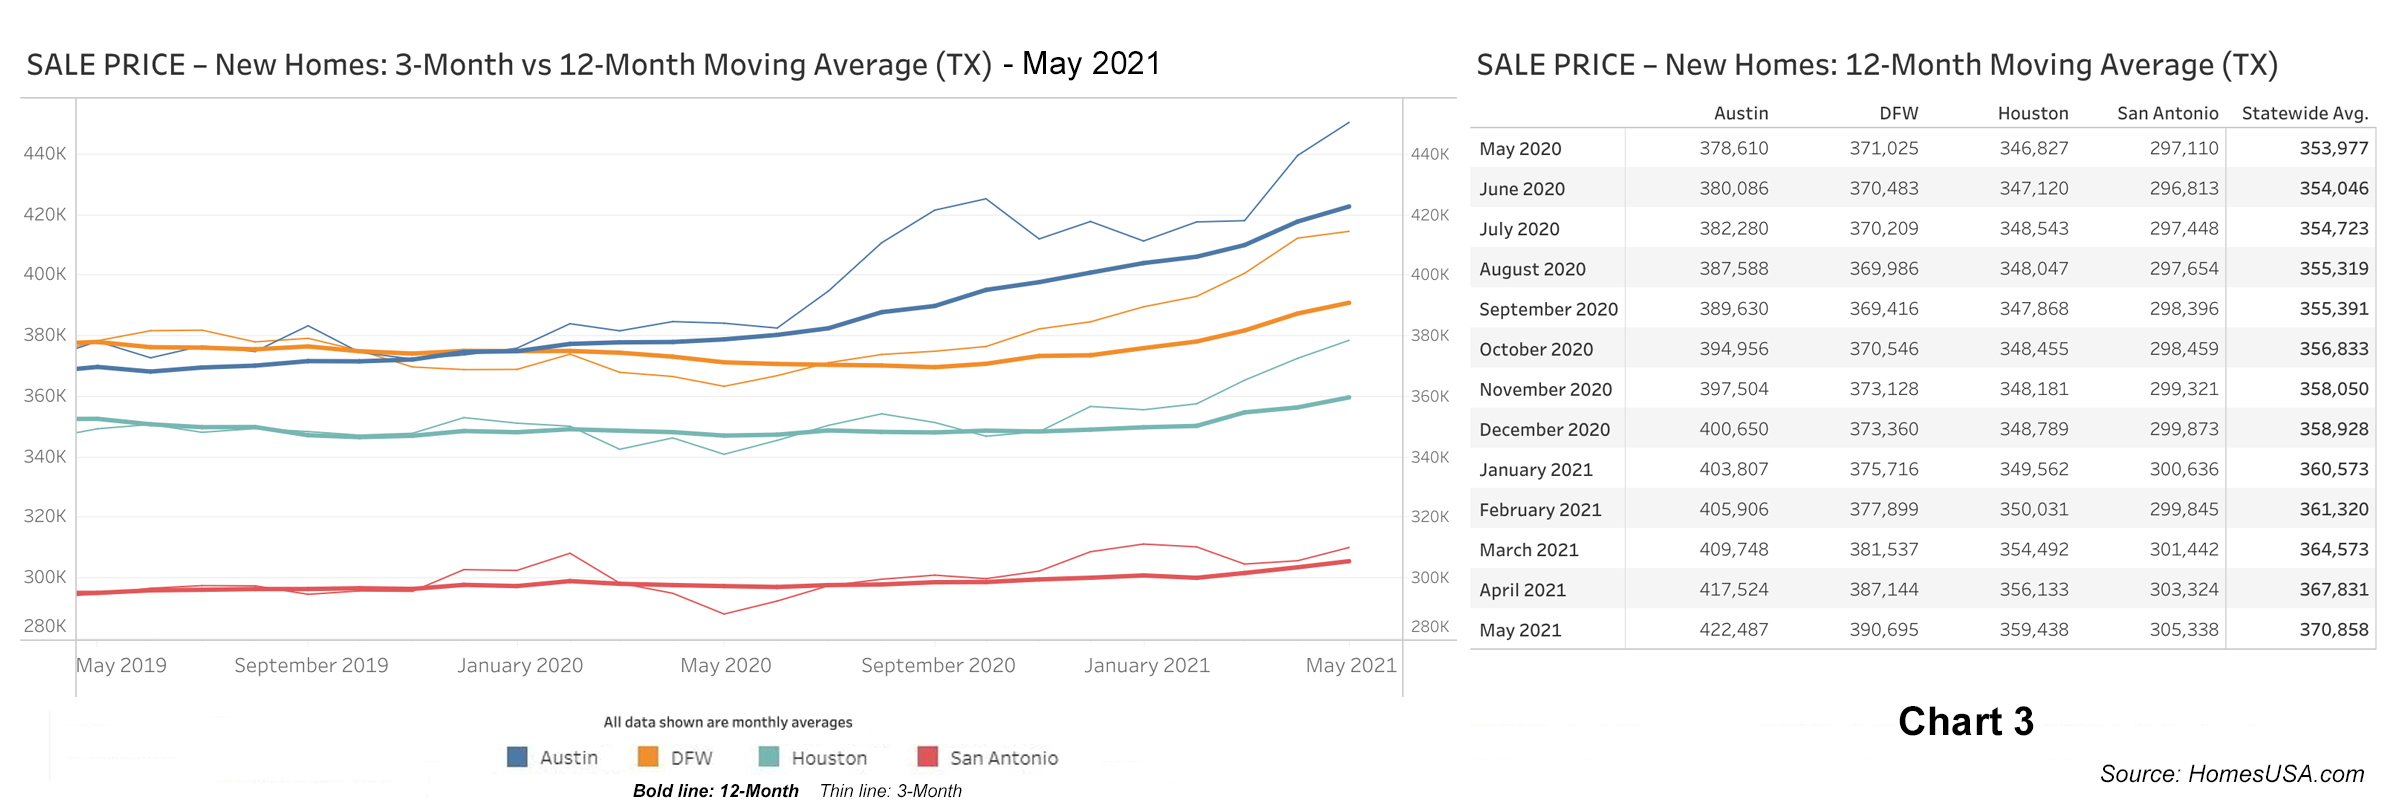 Chart 3: Texas New Home Prices - May 2021